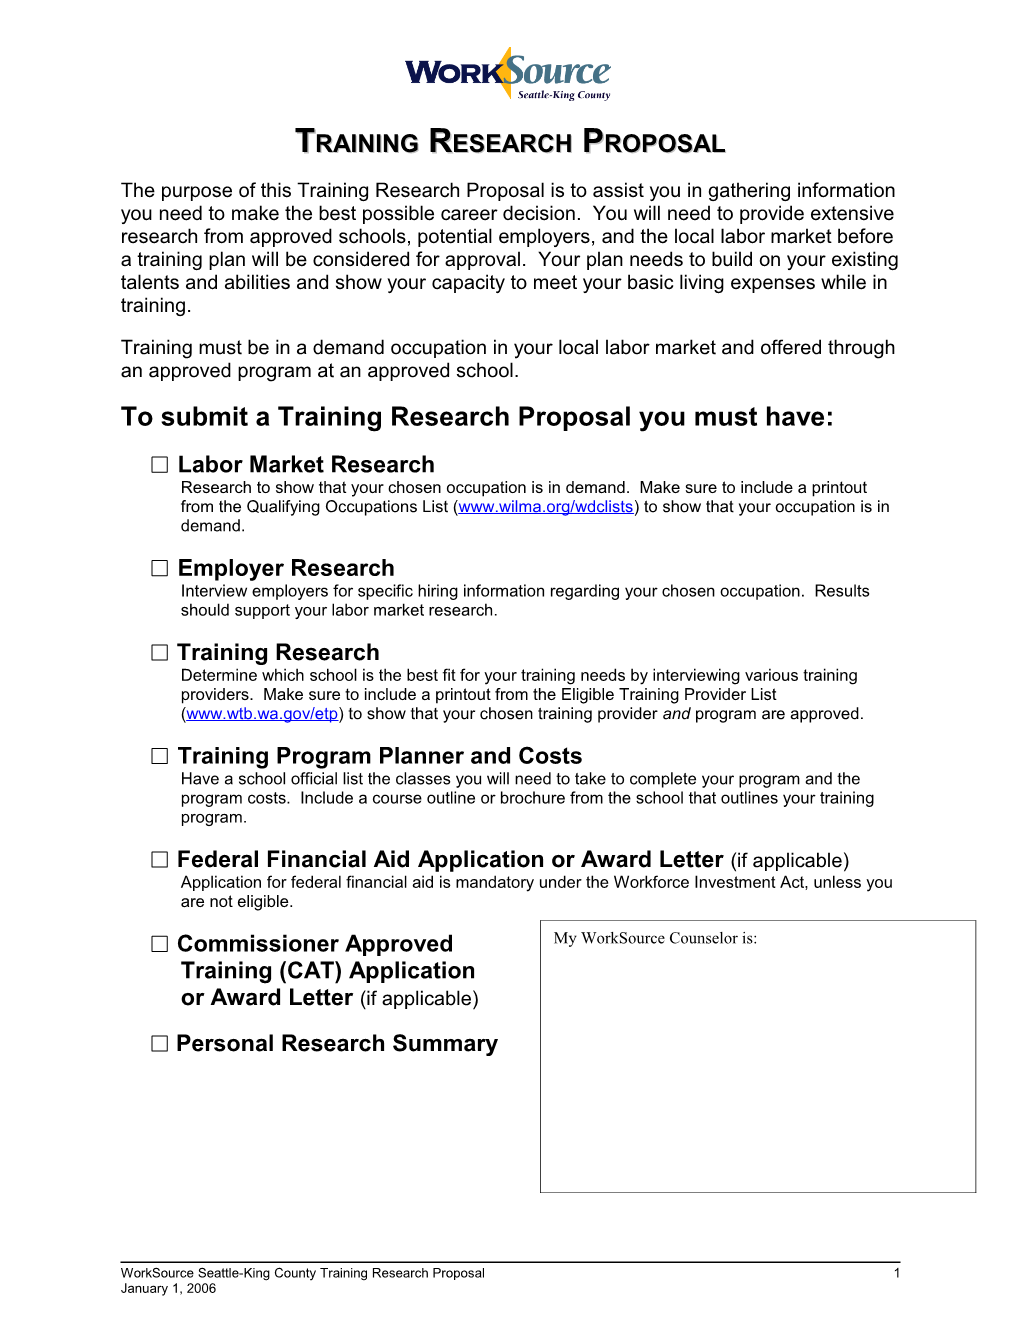 To Submit a Training Research Proposal You Must Have